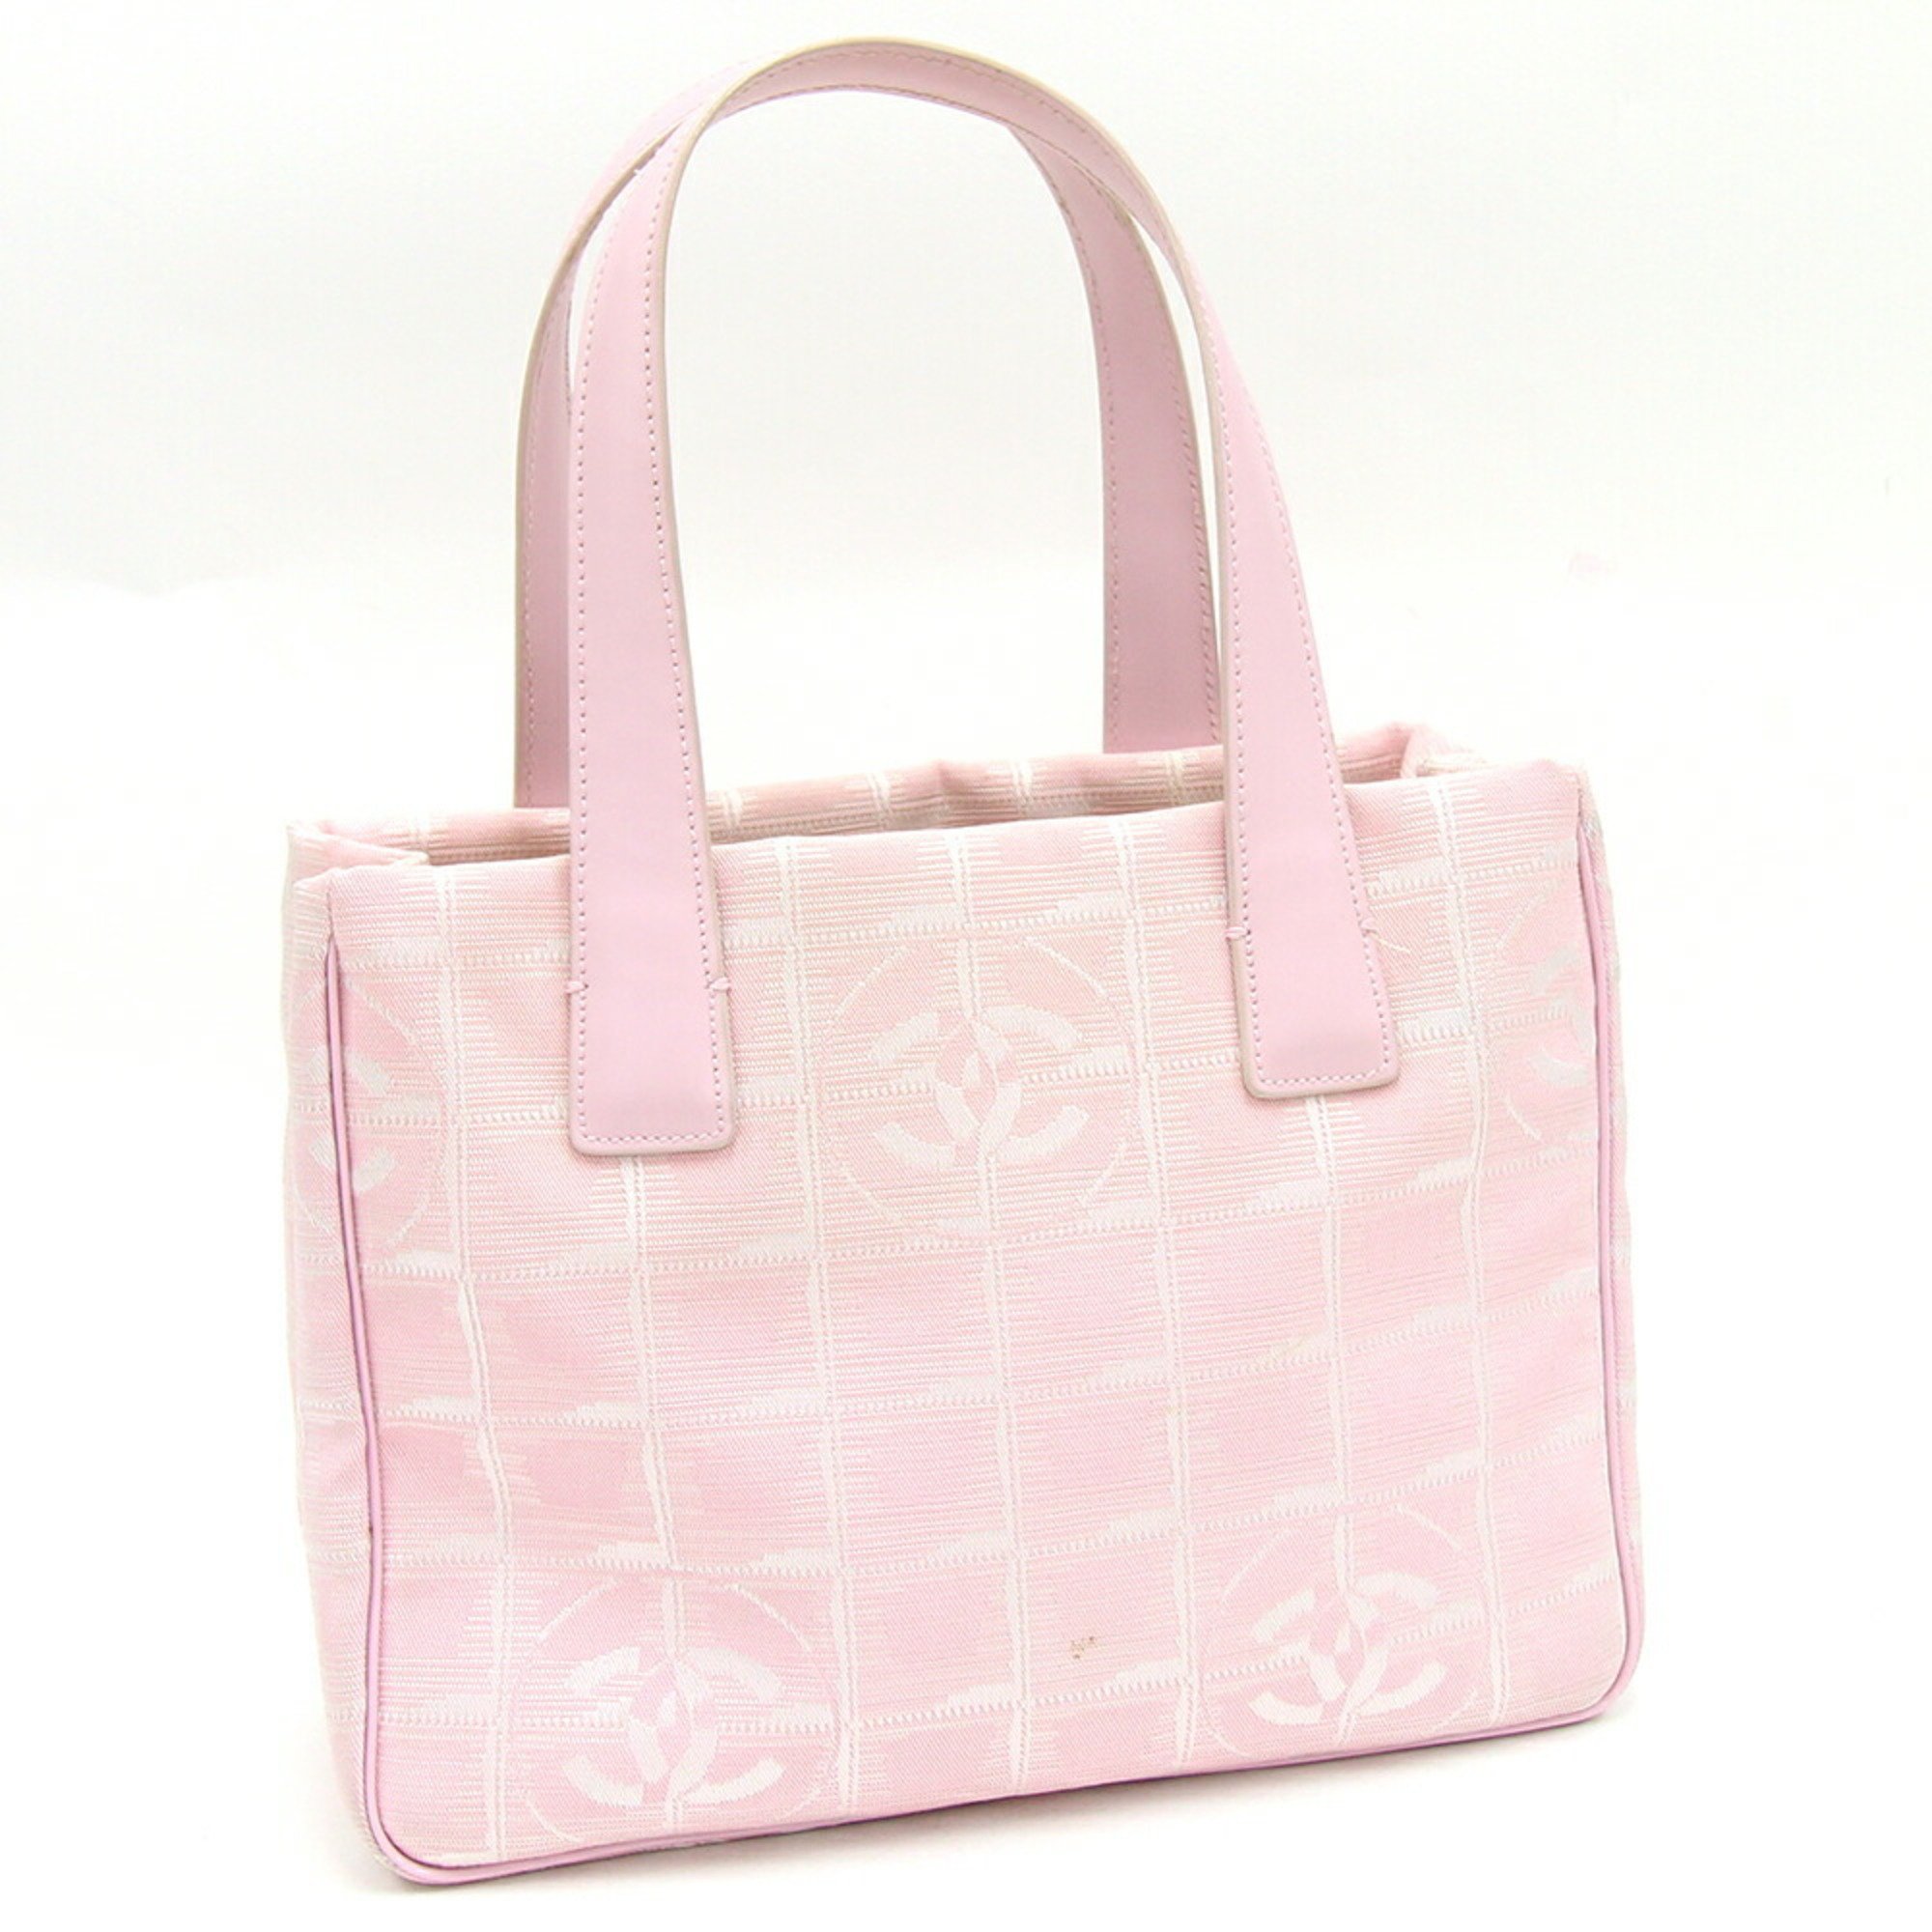 Chanel Handbag New Travel Line Tote TPM Pink Canvas Leather Women's CHANEL